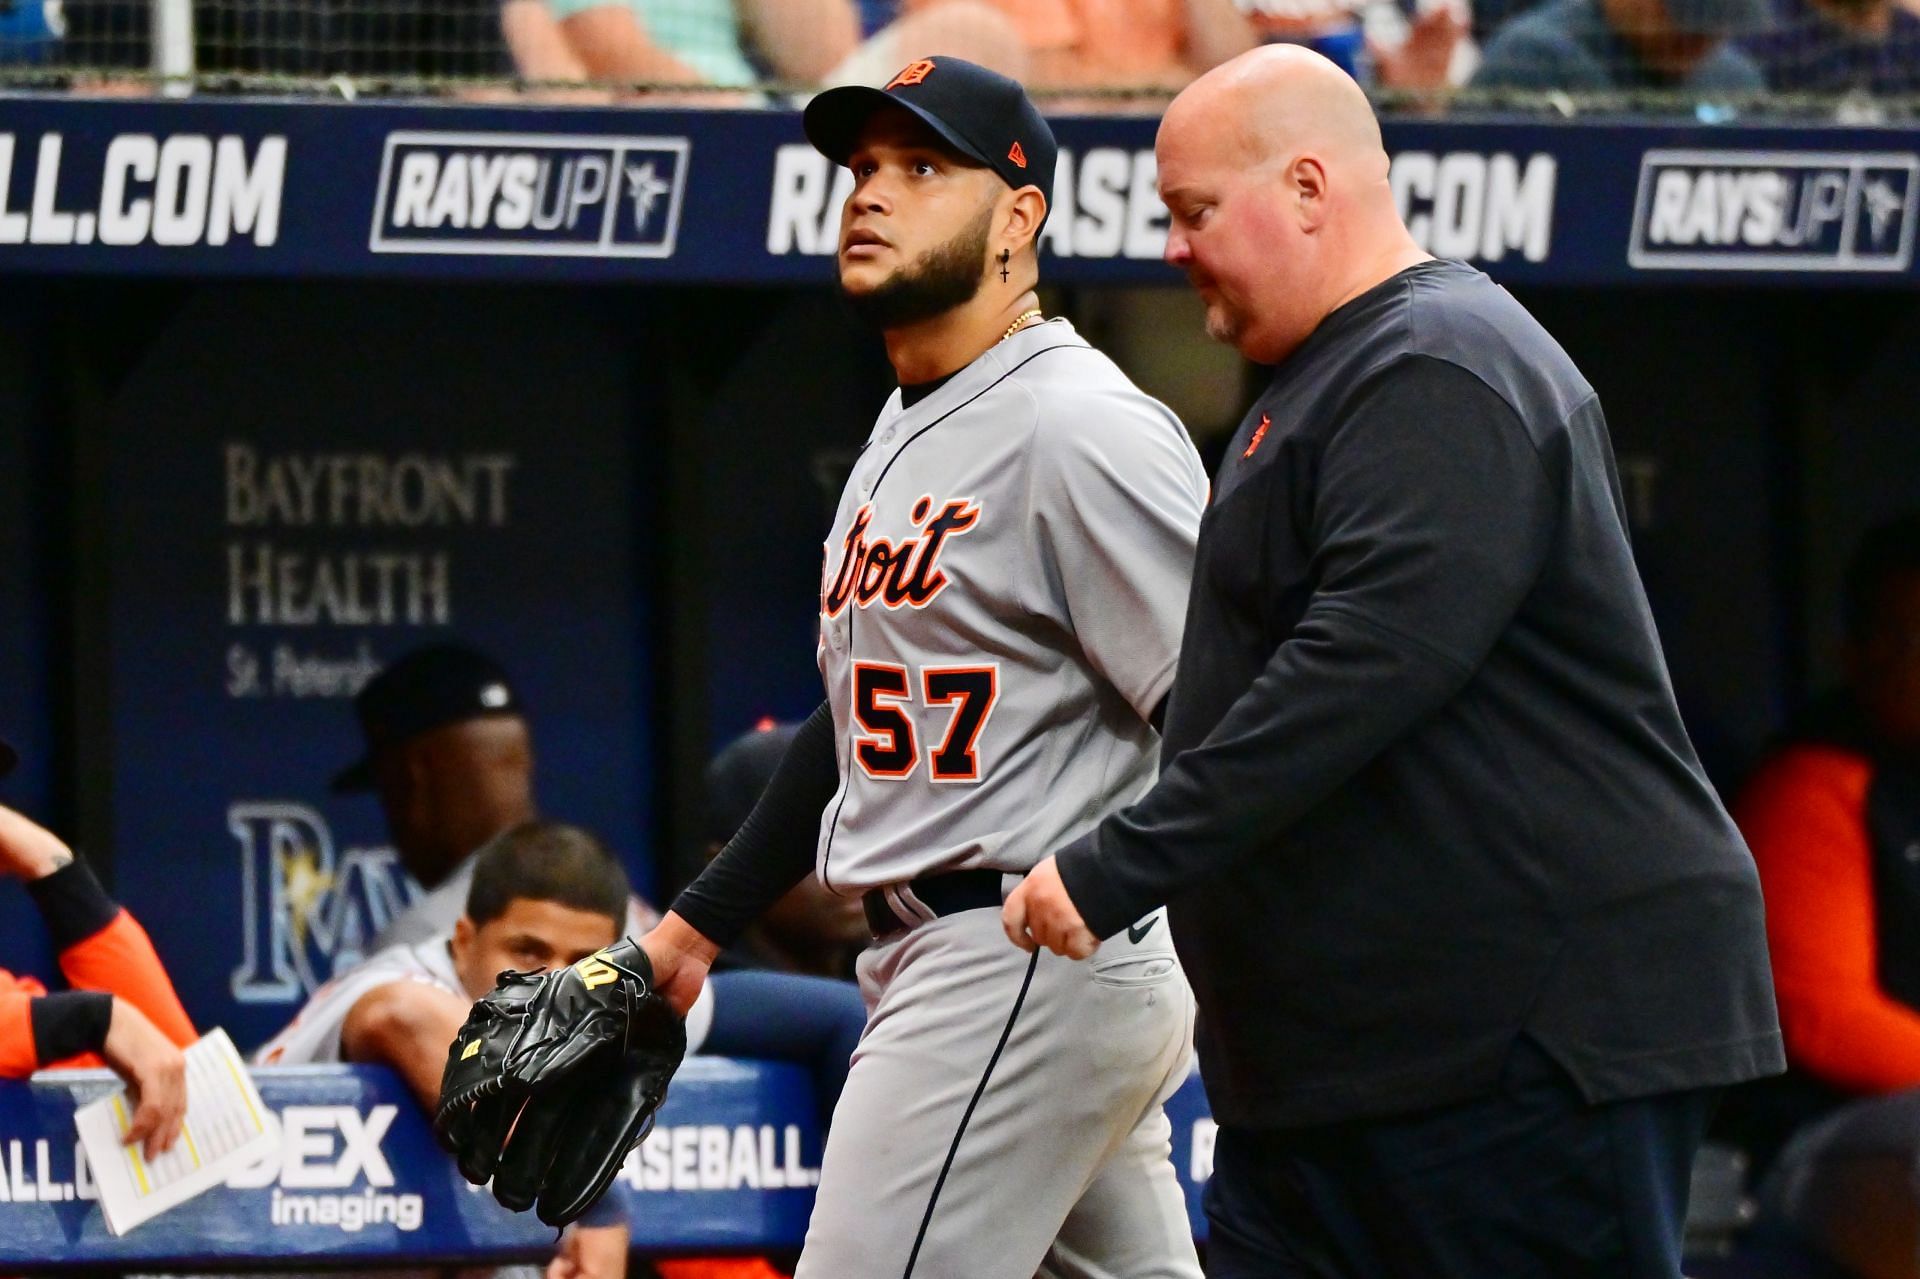 Detroit Tigers SP Eduardo Rodriguez was pulled from the game with an apparent injury.